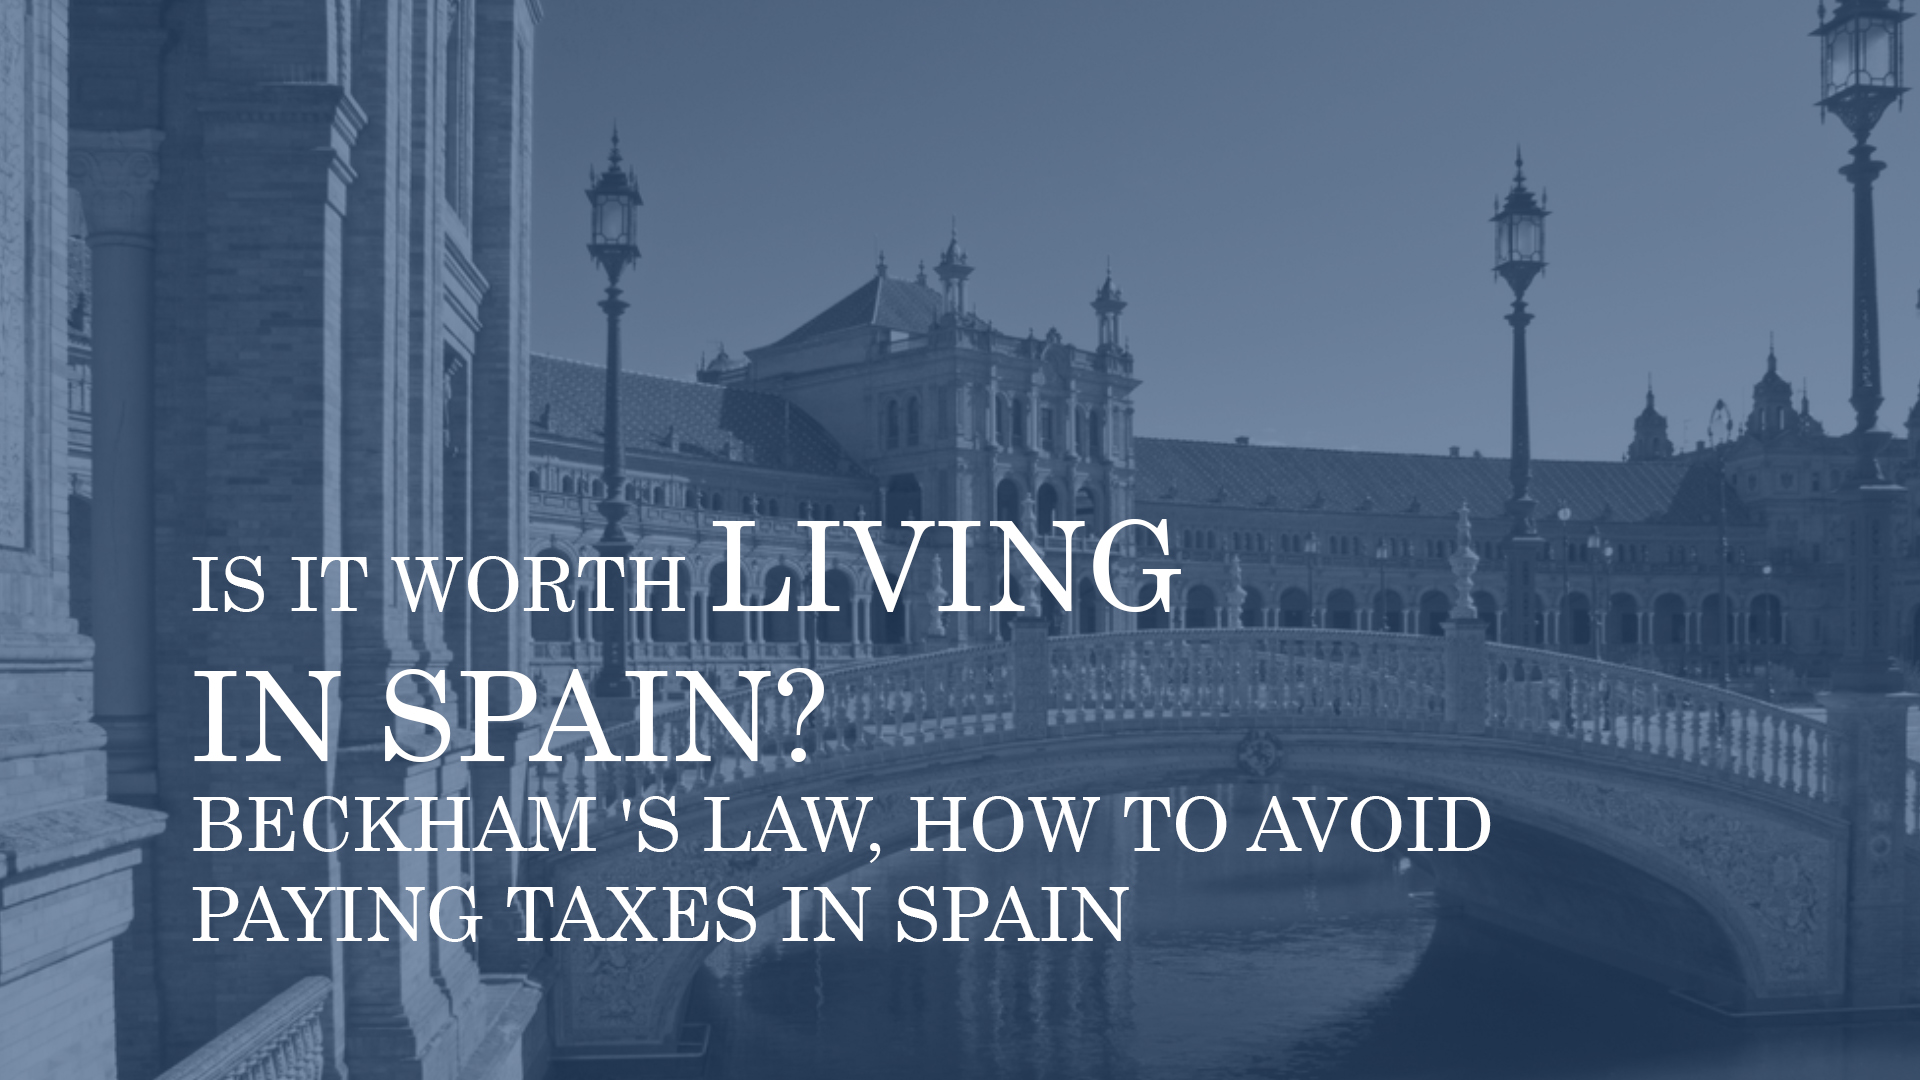 IS IT WORTH LIVING IN SPAIN? BECKHAM 'S LAW, HOW TO AVOID PAYING TAXES IN SPAIN